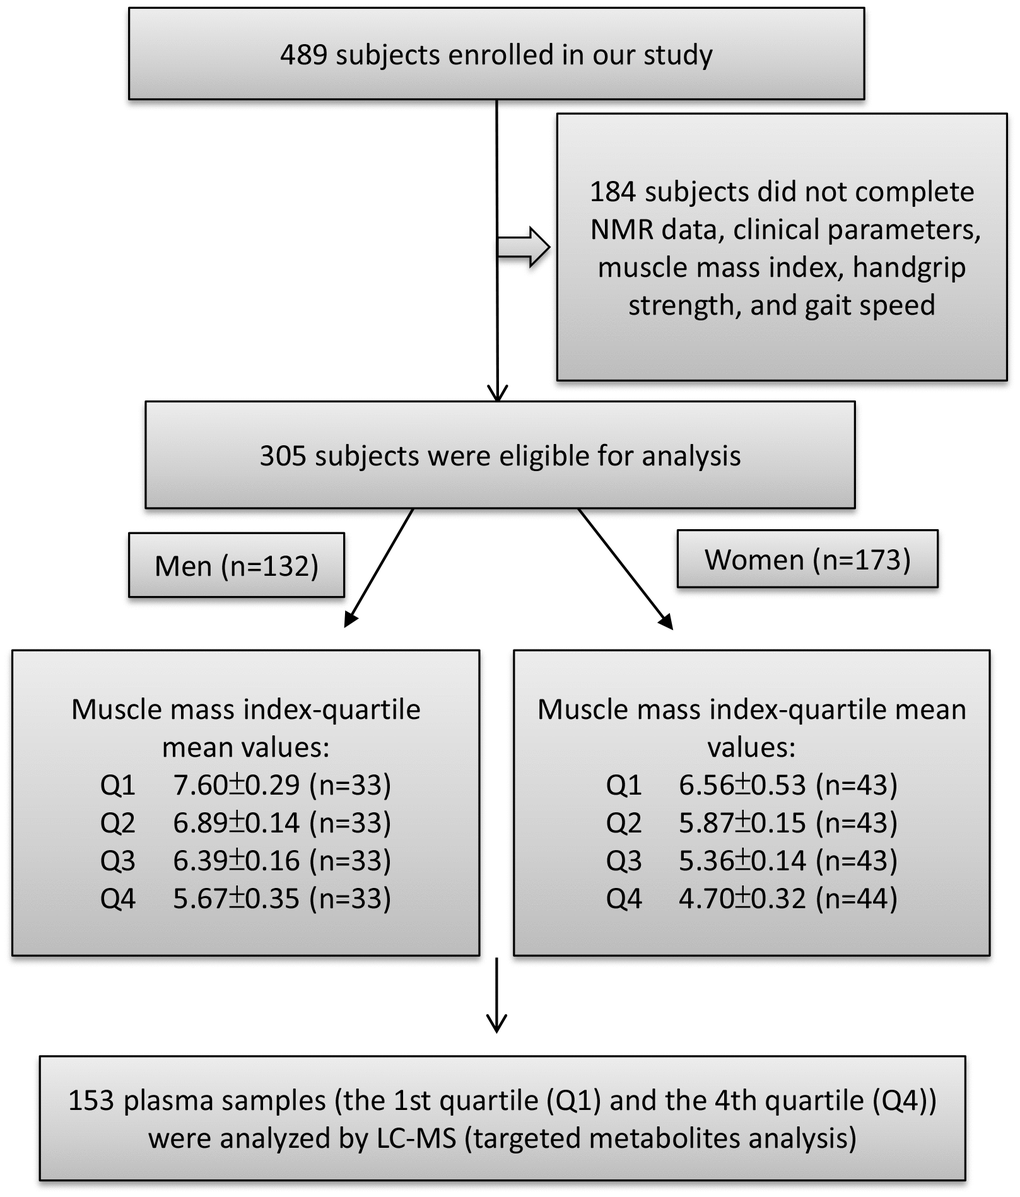 Study flow diagram shows number of participants for untargeted and targeted metabolite analysis. A total of 489 participants enrolled in this study of which 305 subjects were eligible to participate. According to appendicular skeletal muscle mass index (ASMI) values, we divided the male and female subjects into four groups each by quartile. The ASMI values of quartile 1, 2, 3, and 4 (Q1, Q2, Q3, and Q4) were 7.60±0.29, 6.89±0.14, 6.39±0.16, and 5.67±0.35 kg/m2, respectively. In the female group, quartile 1, 2, 3, and 4 (Q1, Q2, Q3, and Q4) ASMI values were: 6.56±0.53, 5.87±0.15, 5.36±0.14, and 4.70±0.32 kg/m2, respectively. The first quartile (Q1) was defined as the control group and the fourth quartile (Q4) as the muscle loss group. Both Q1 and Q4 were performed for metabolite analysis.